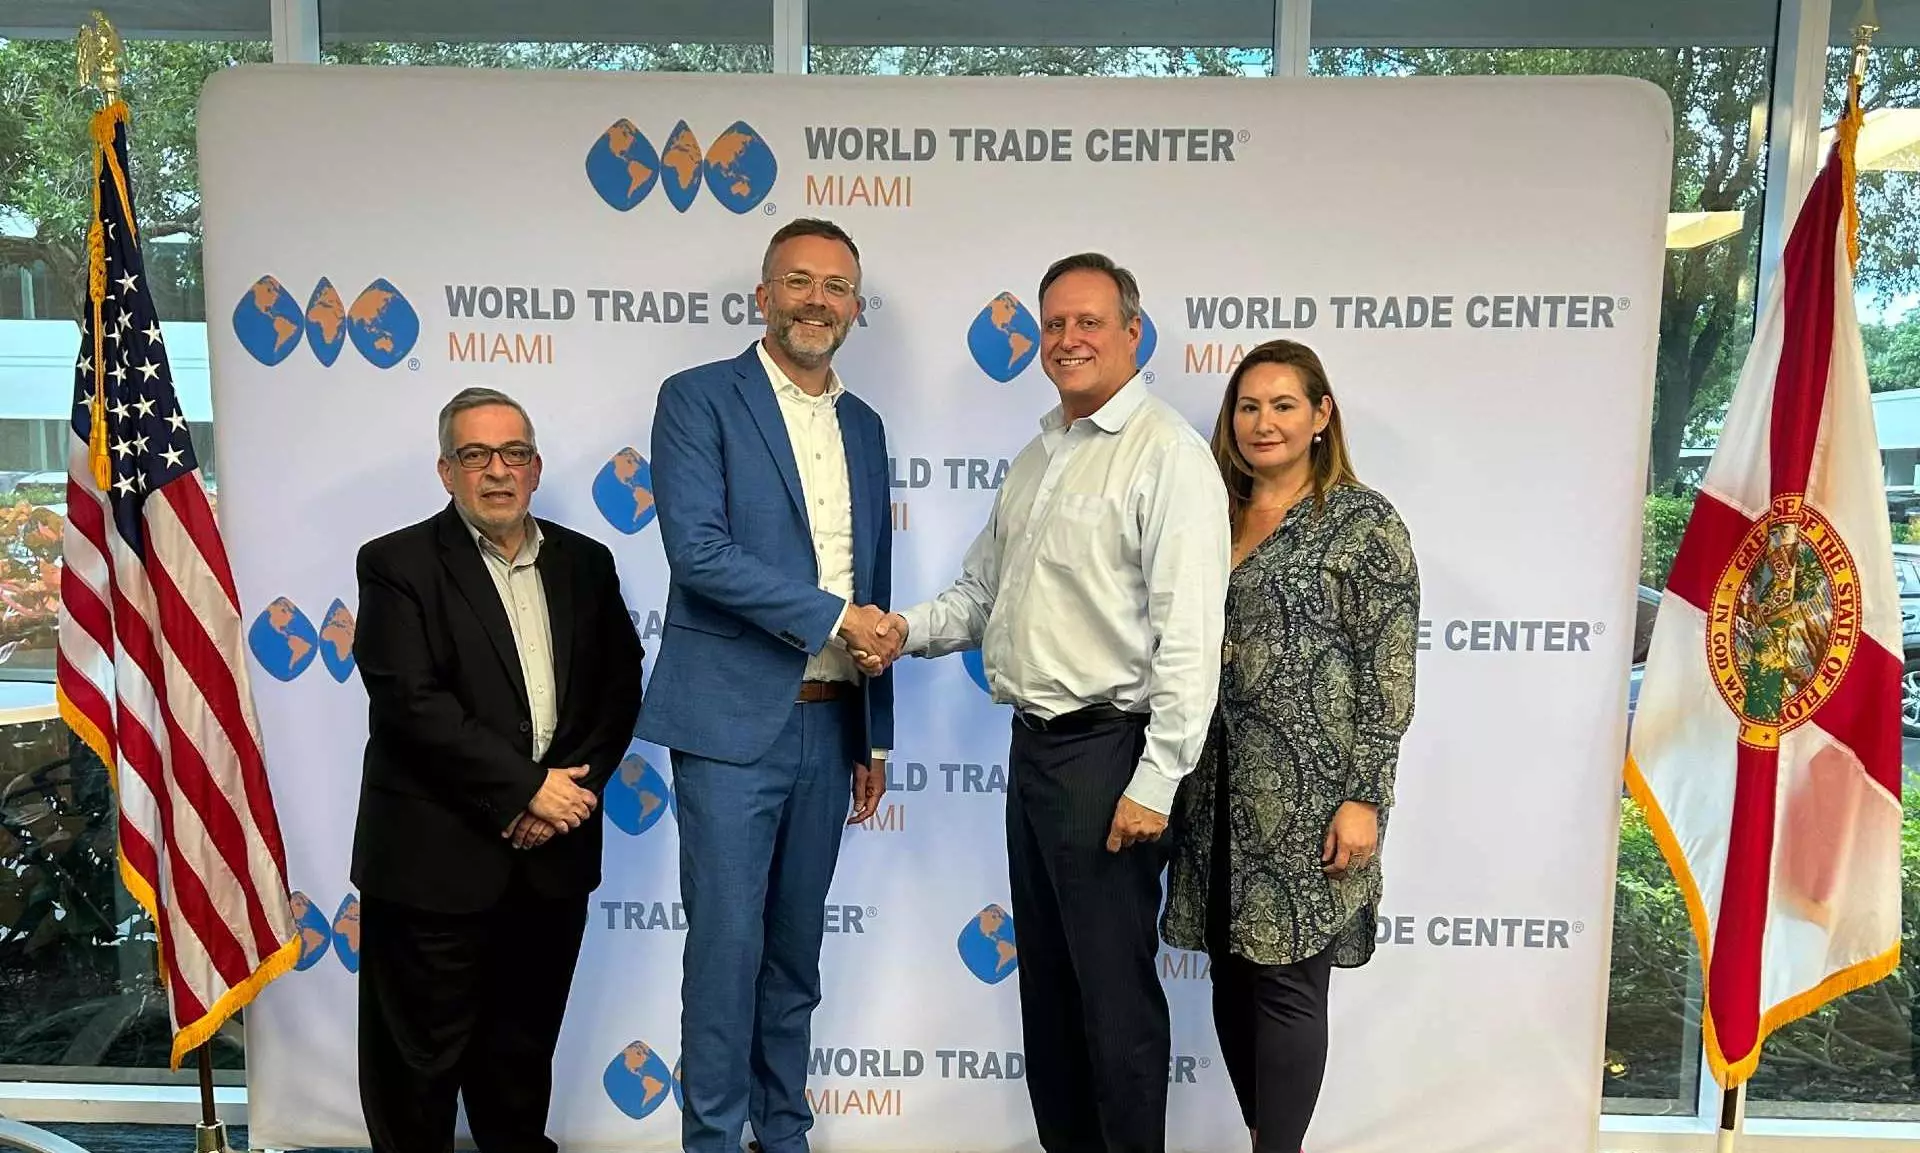 Messe München, World Trade Center Miami to jointly organise summit